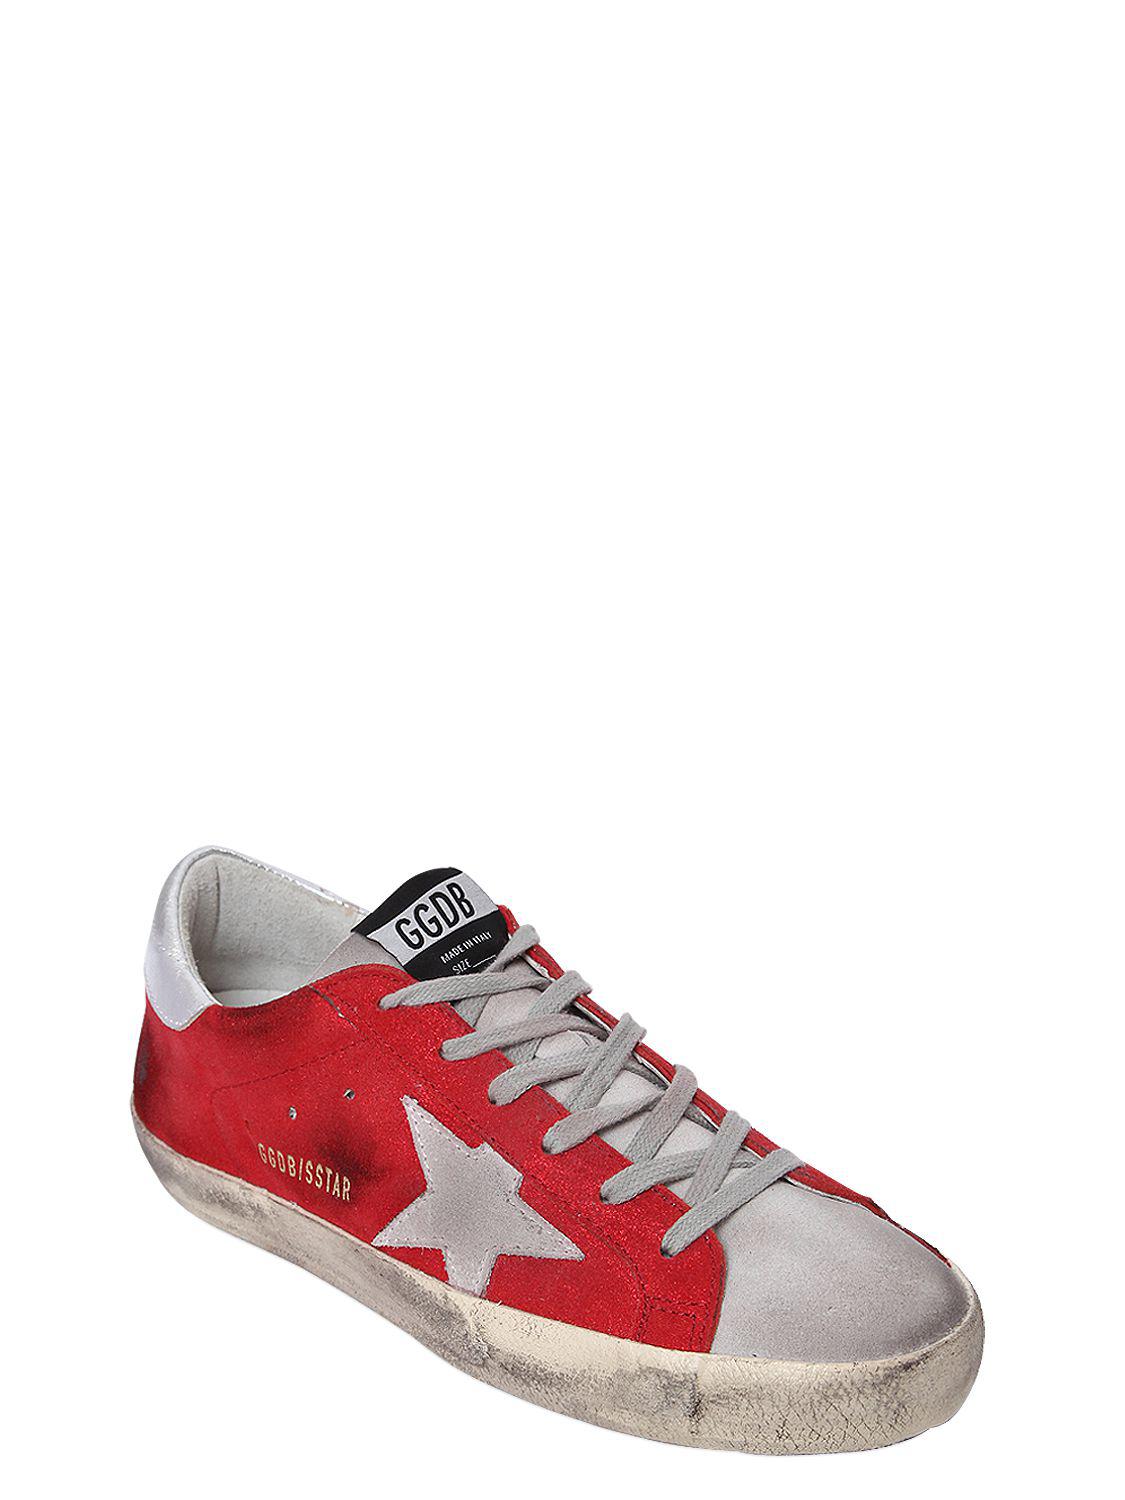 Golden Goose Deluxe Brand Suede Star Leather Low-top Sneakers in Red ...